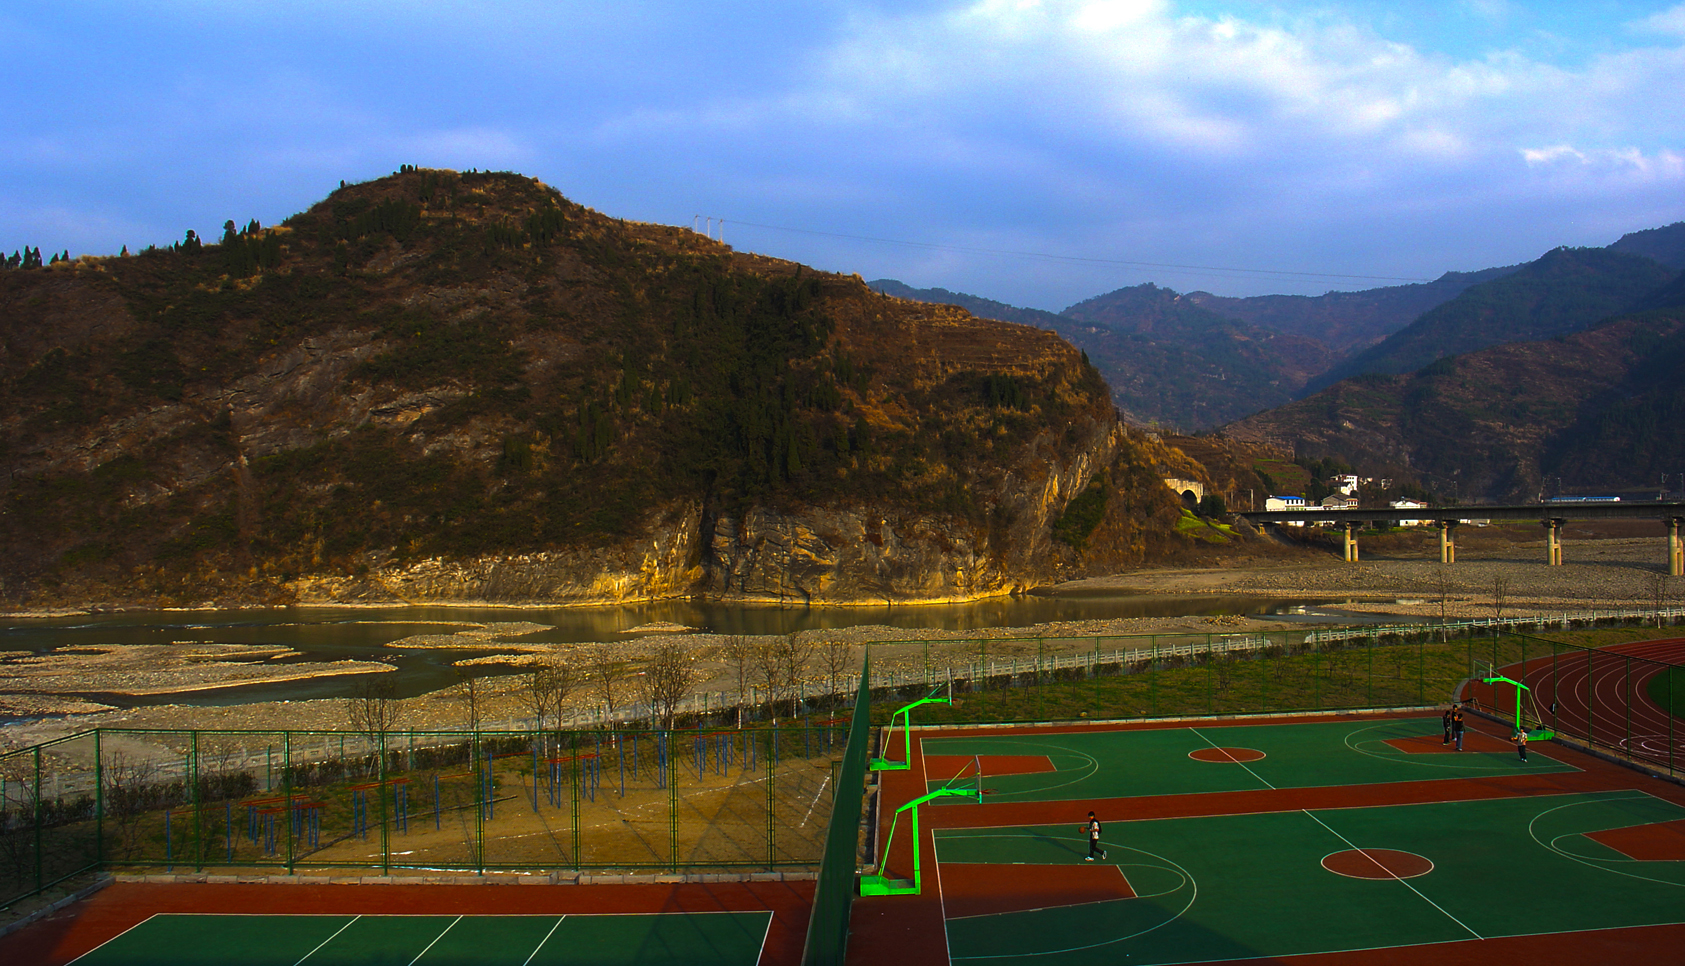 The basketball court, one of the boys preferred places